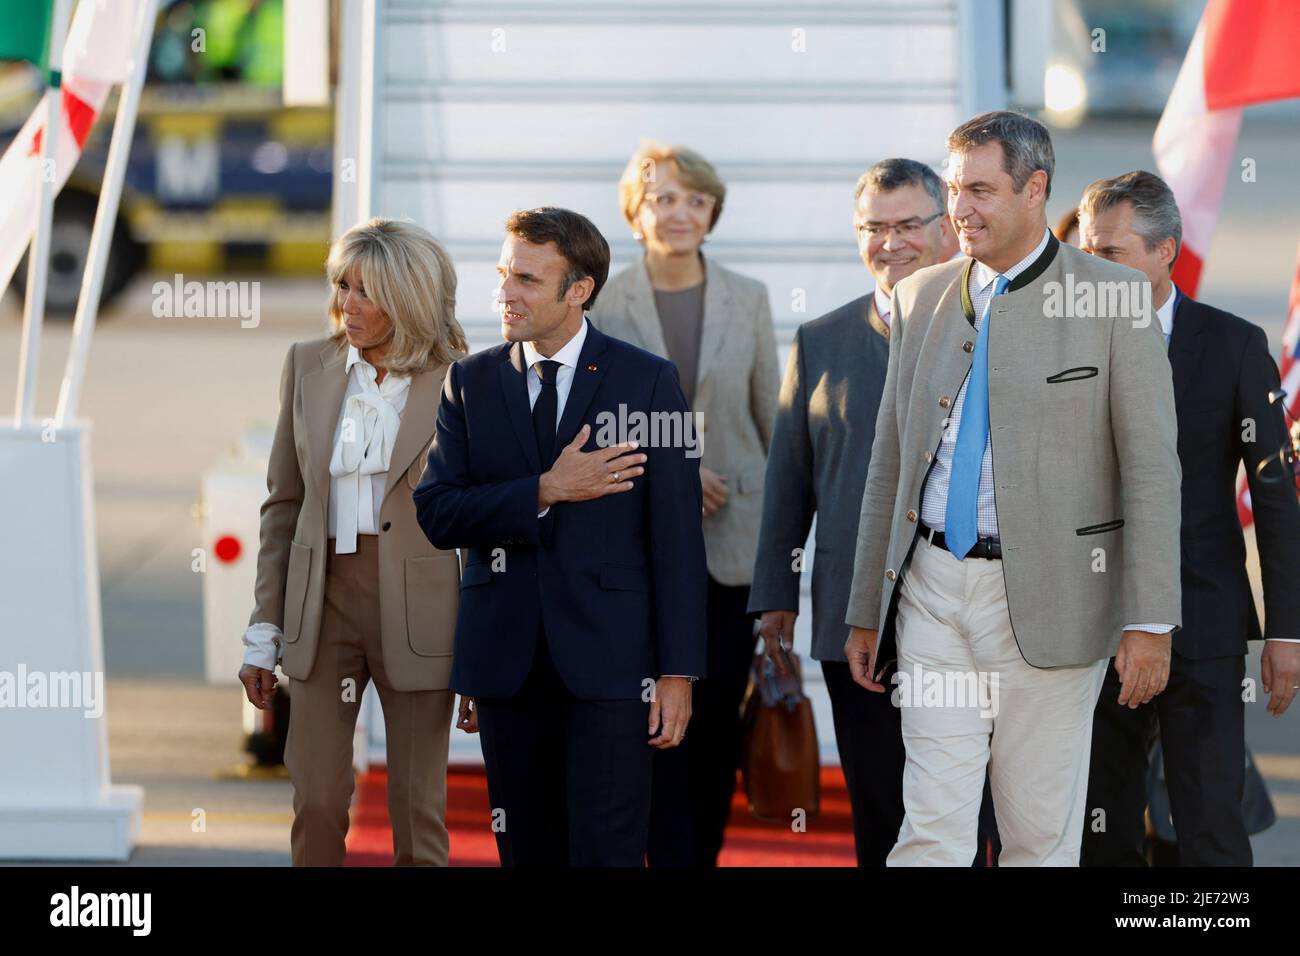 People in traditional Bavarian clothes and Bavaria's State Premier Markus Soeder welcome French President Emmanuel Macron and his wife Brigitte Macron as they arrive at Franz-Josef-Strauss airport in Munich ahead of the G7 summit, which will take place in the Bavarian alpine resort of Elmau Castle, Germany, June 25, 2022. REUTERS/Michaela Rehle Stock Photo